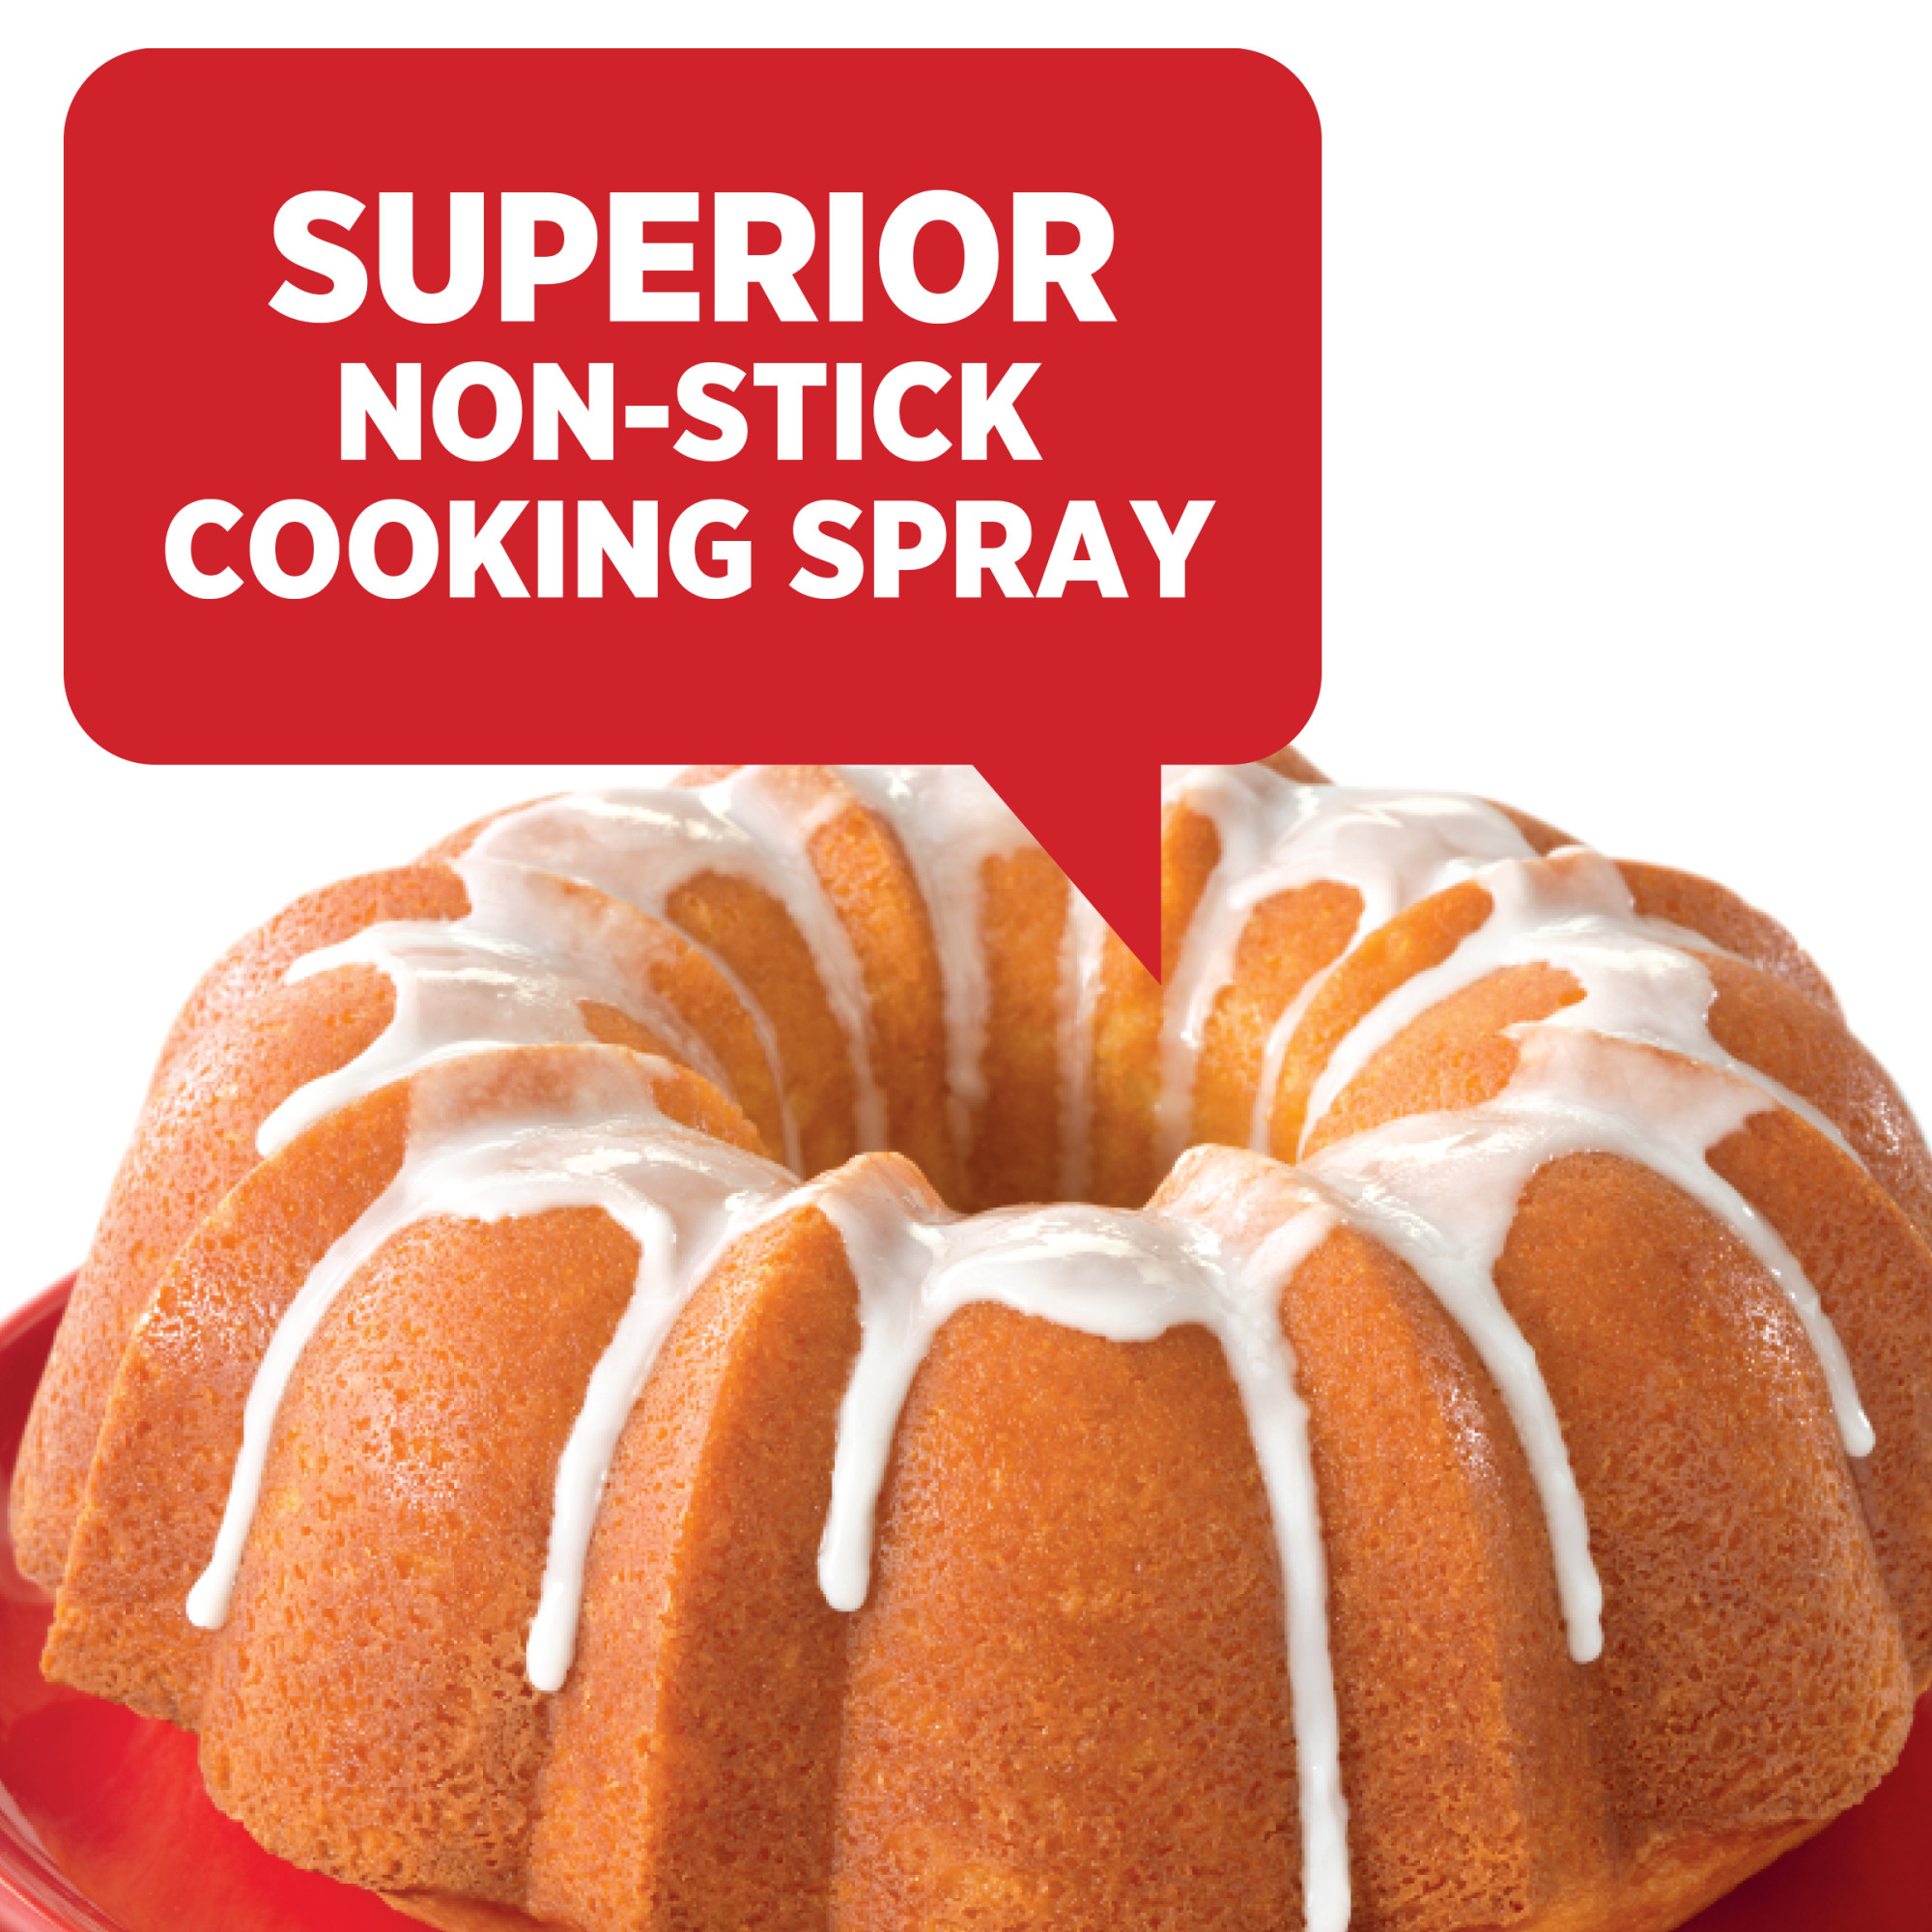 PAM Baking Spray, PerfeCount Release Nonstick Baking Spray Made with Flour, 5 oz - image 2 of 5